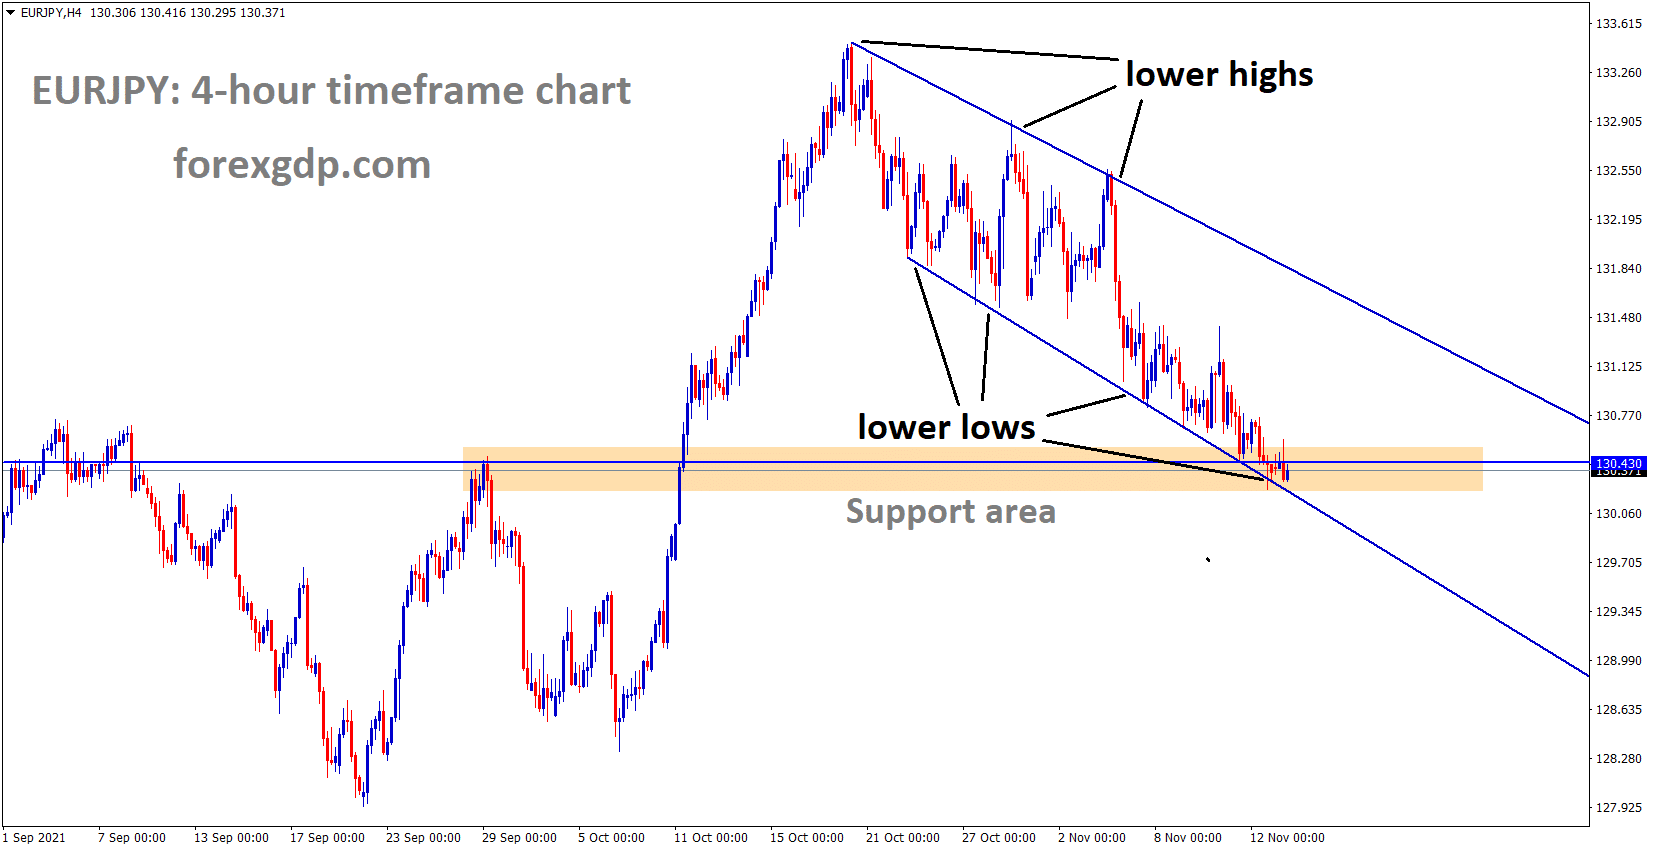 EURJPY is moving in the Descending channel and fallen from the lower high area